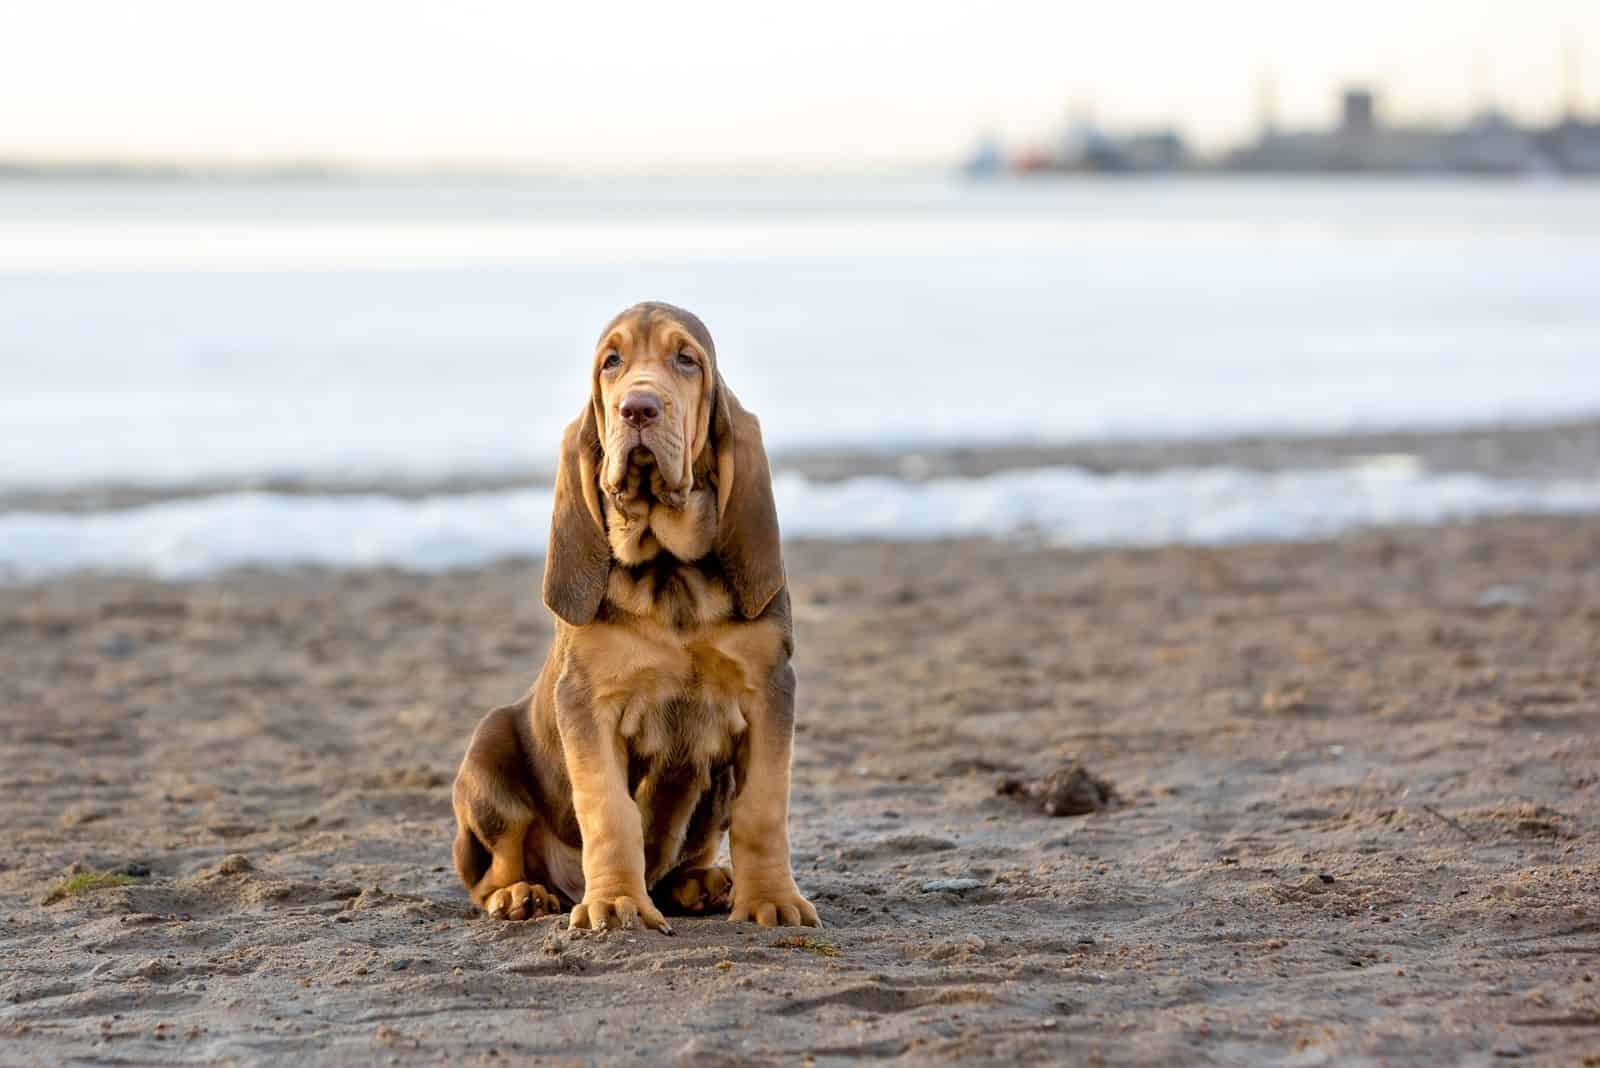 Bloodhound is sitting on the beach